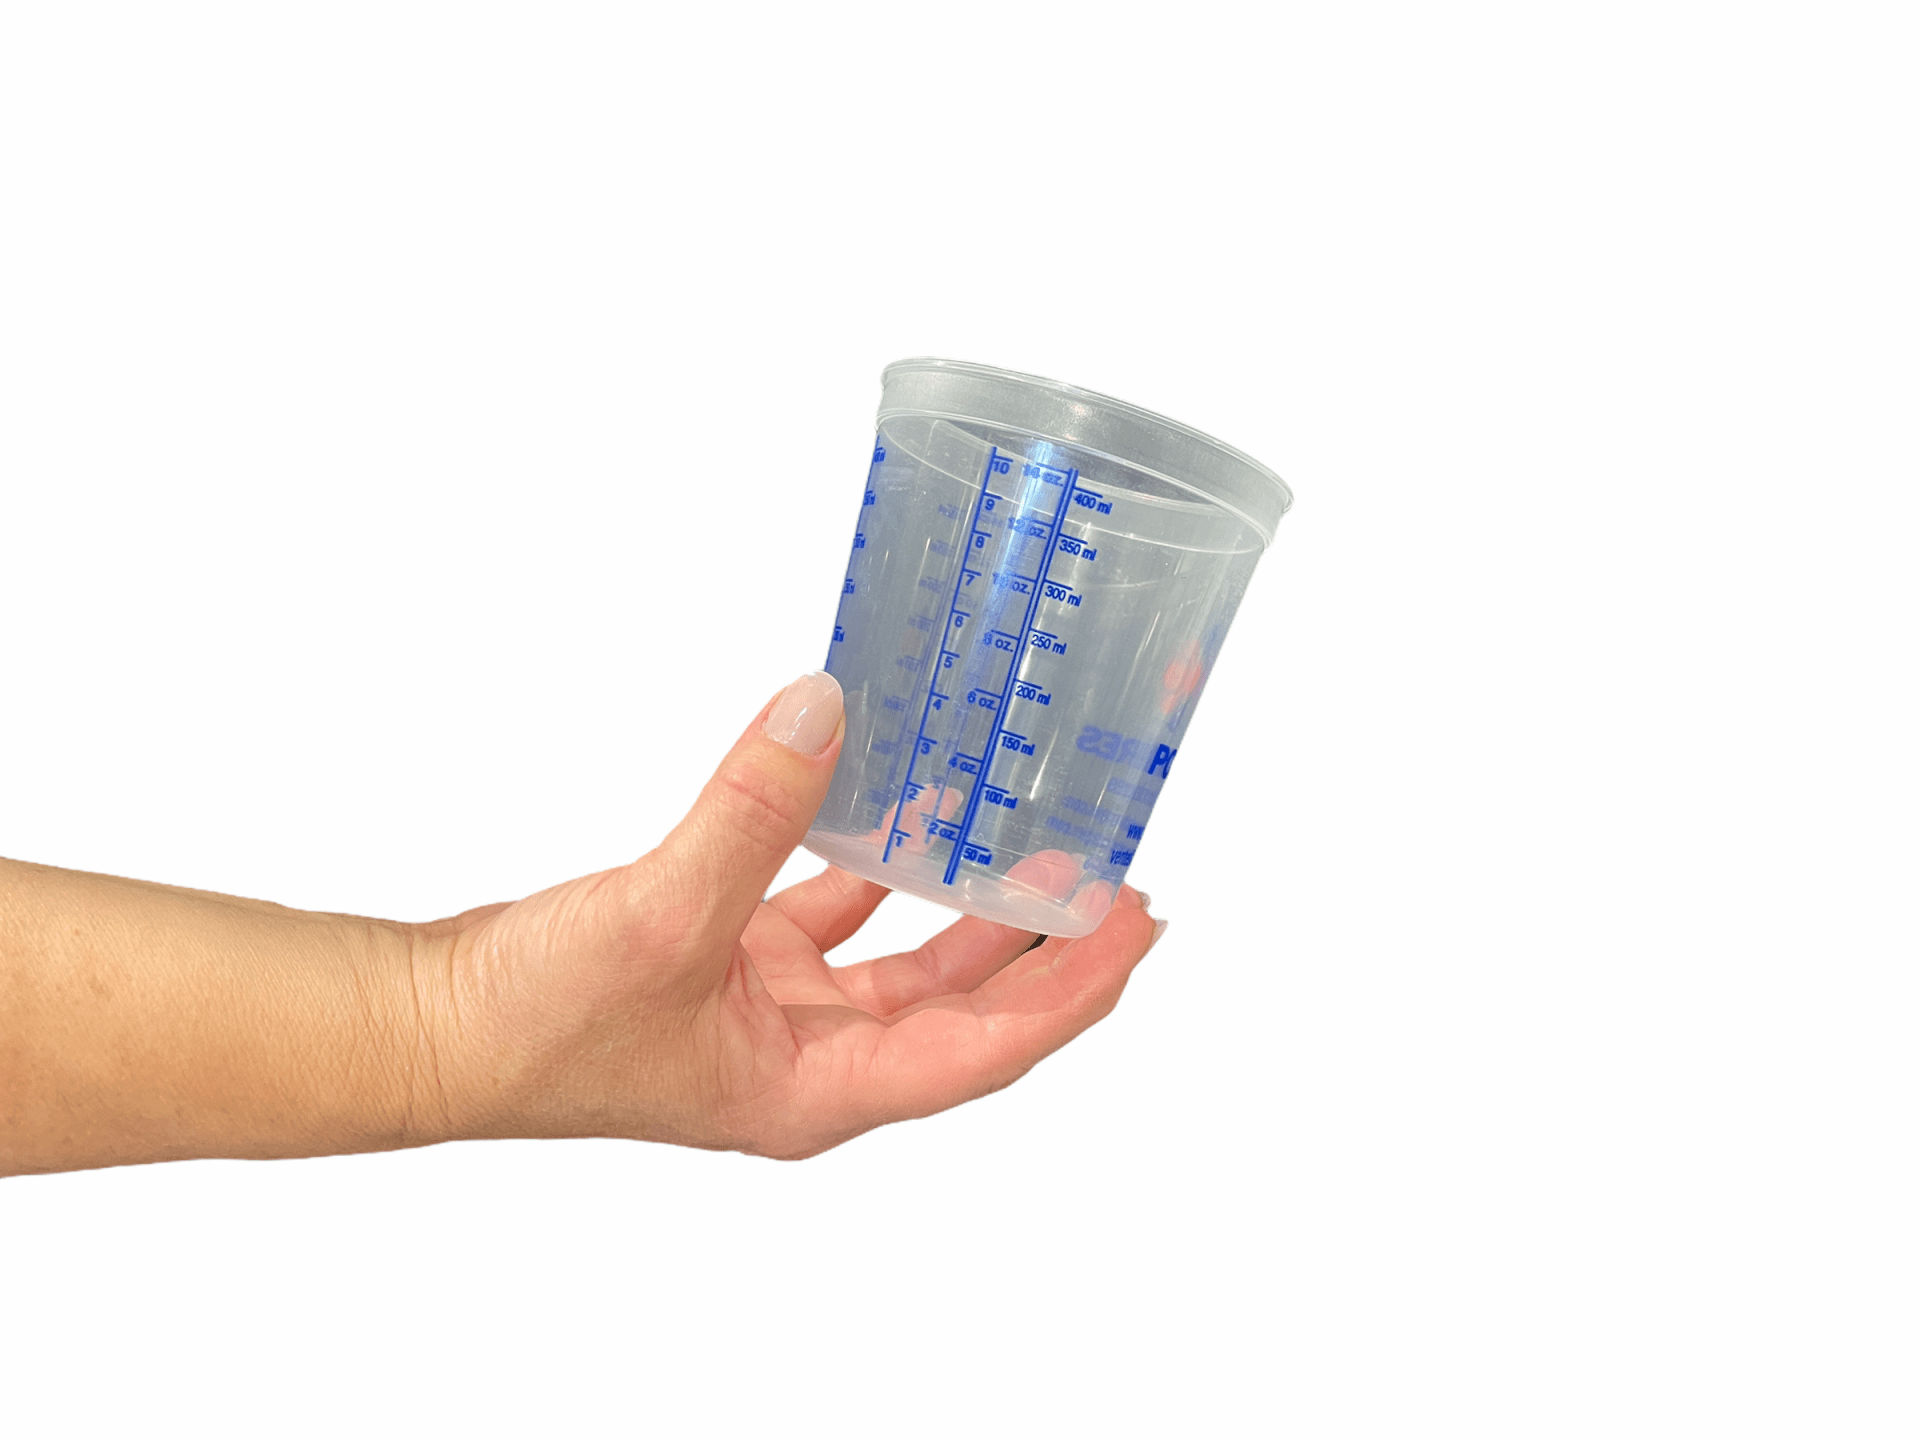 100 Disposable Measuring Cups for Mixing Epoxy Resin